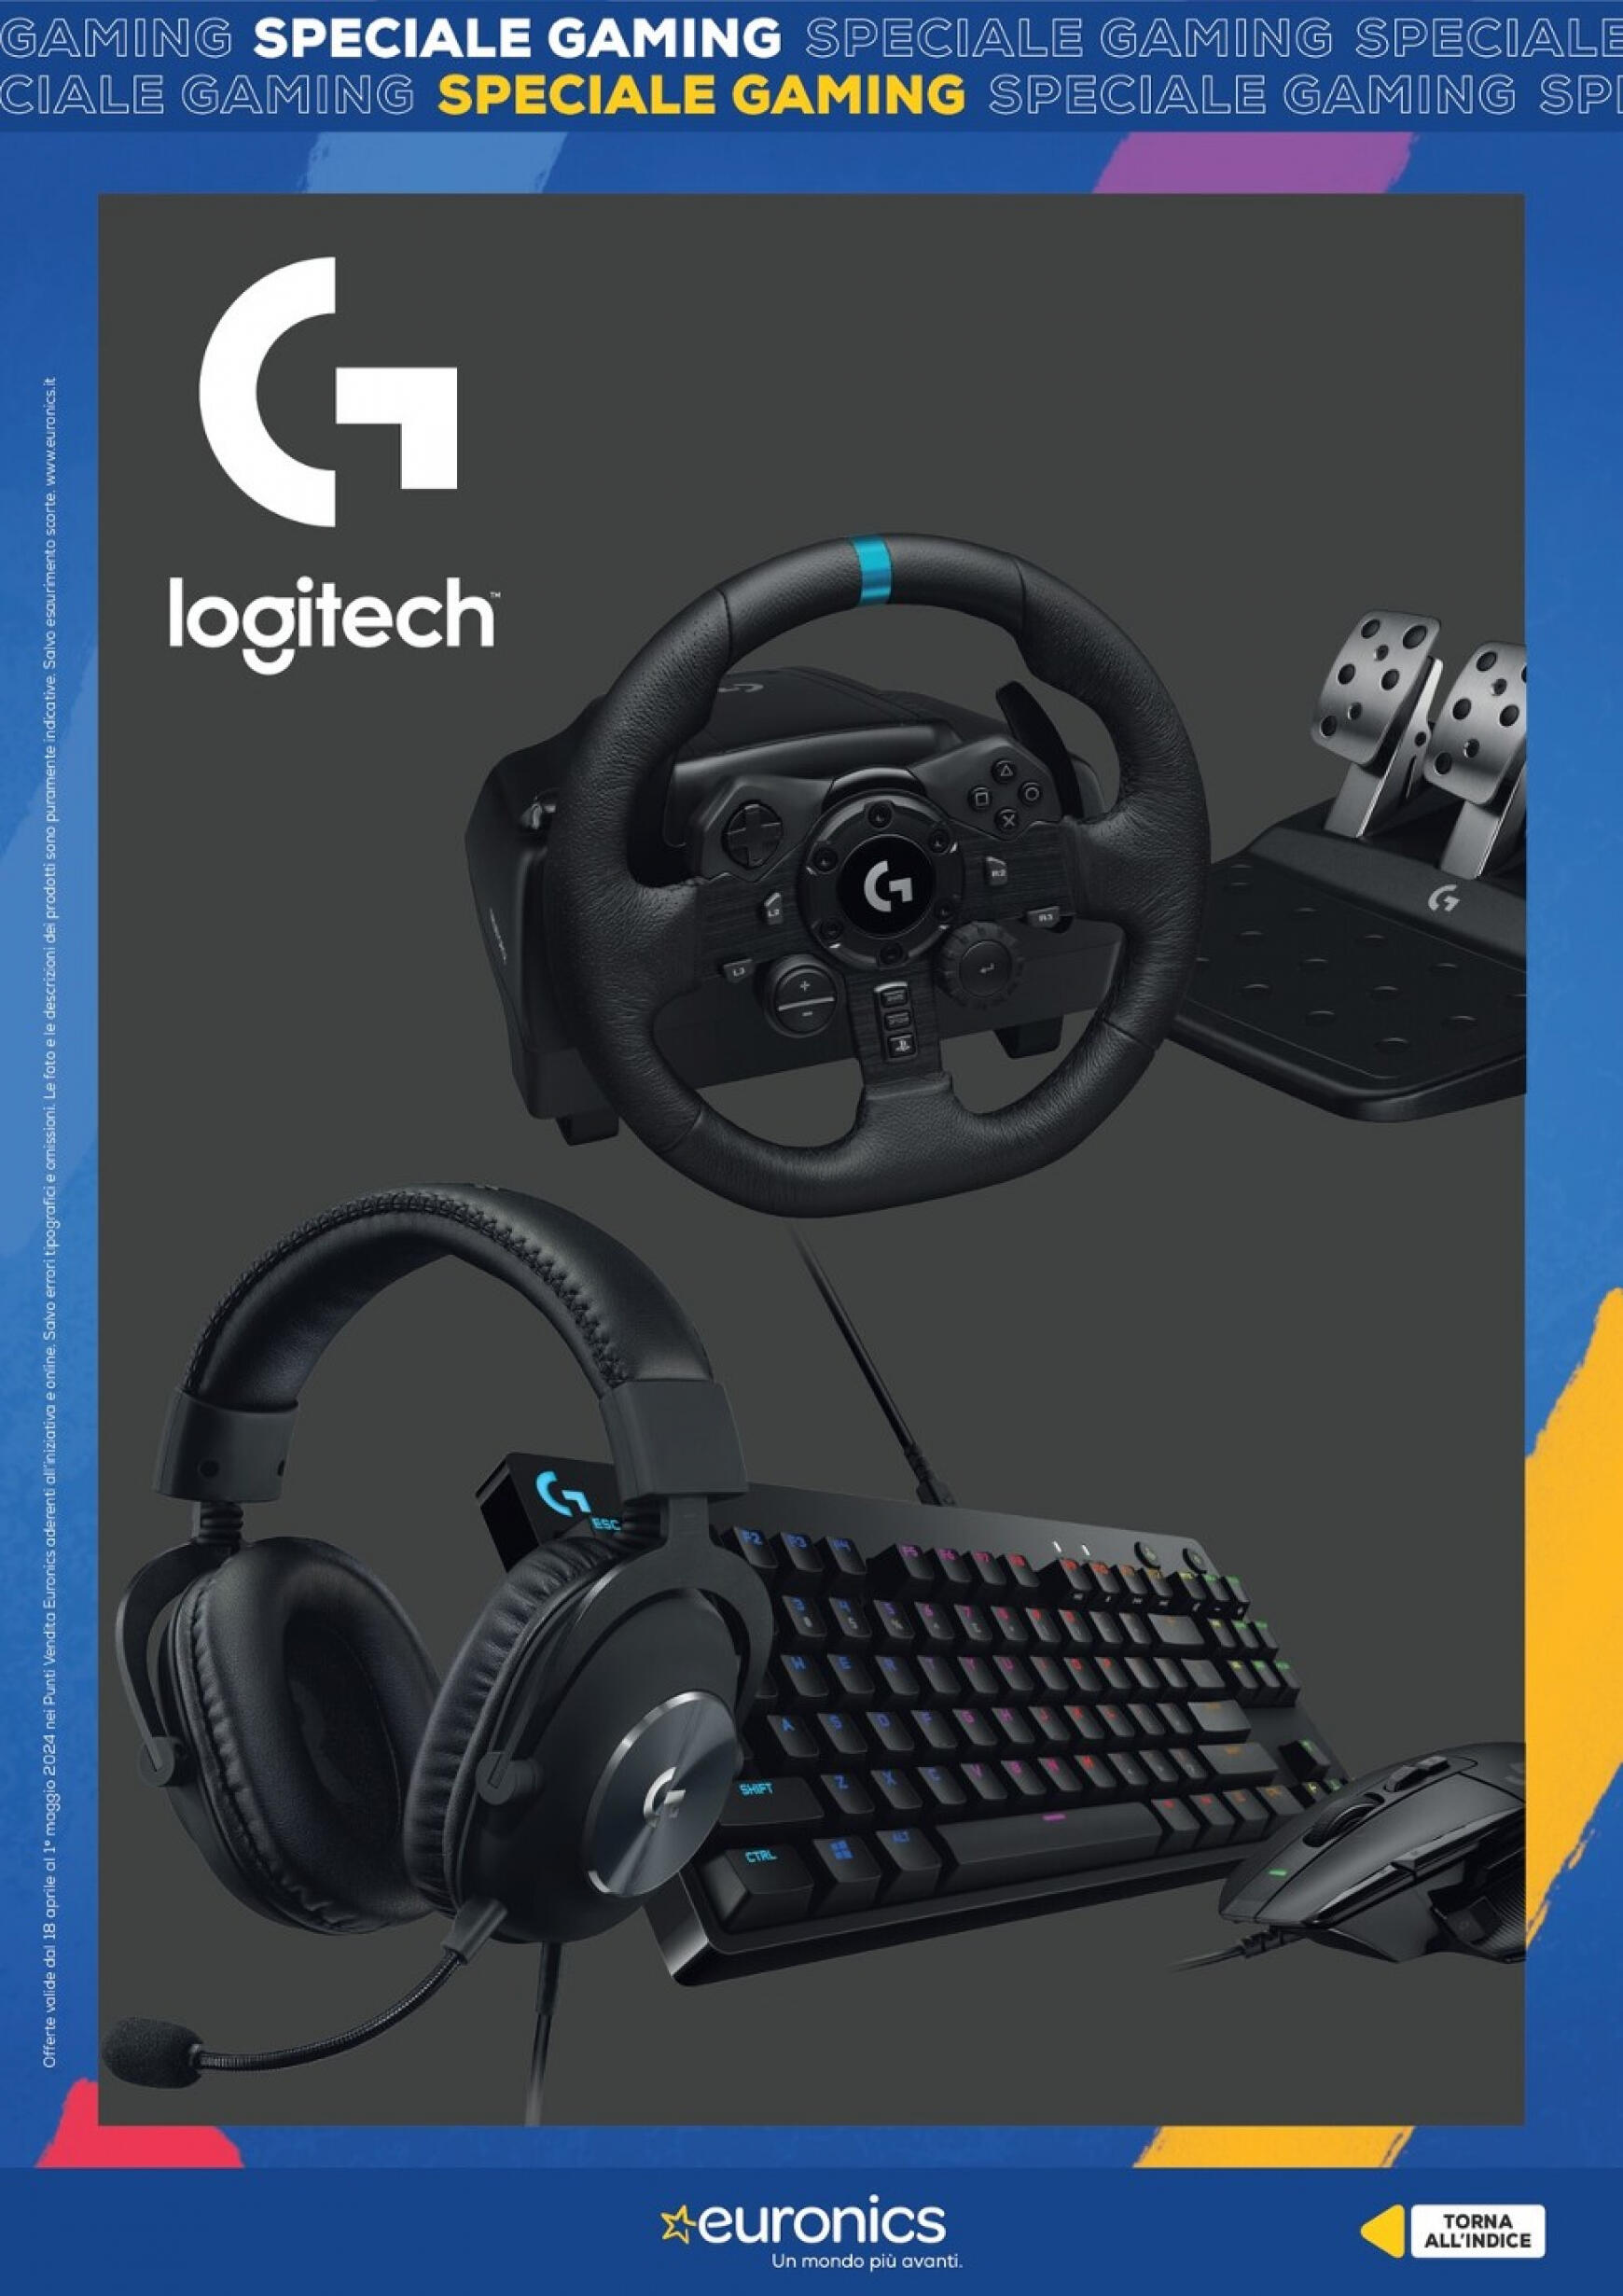 euronics - Nuovo volantino Euronics - Speciale Gaming 18.04. - 01.05. - page: 11